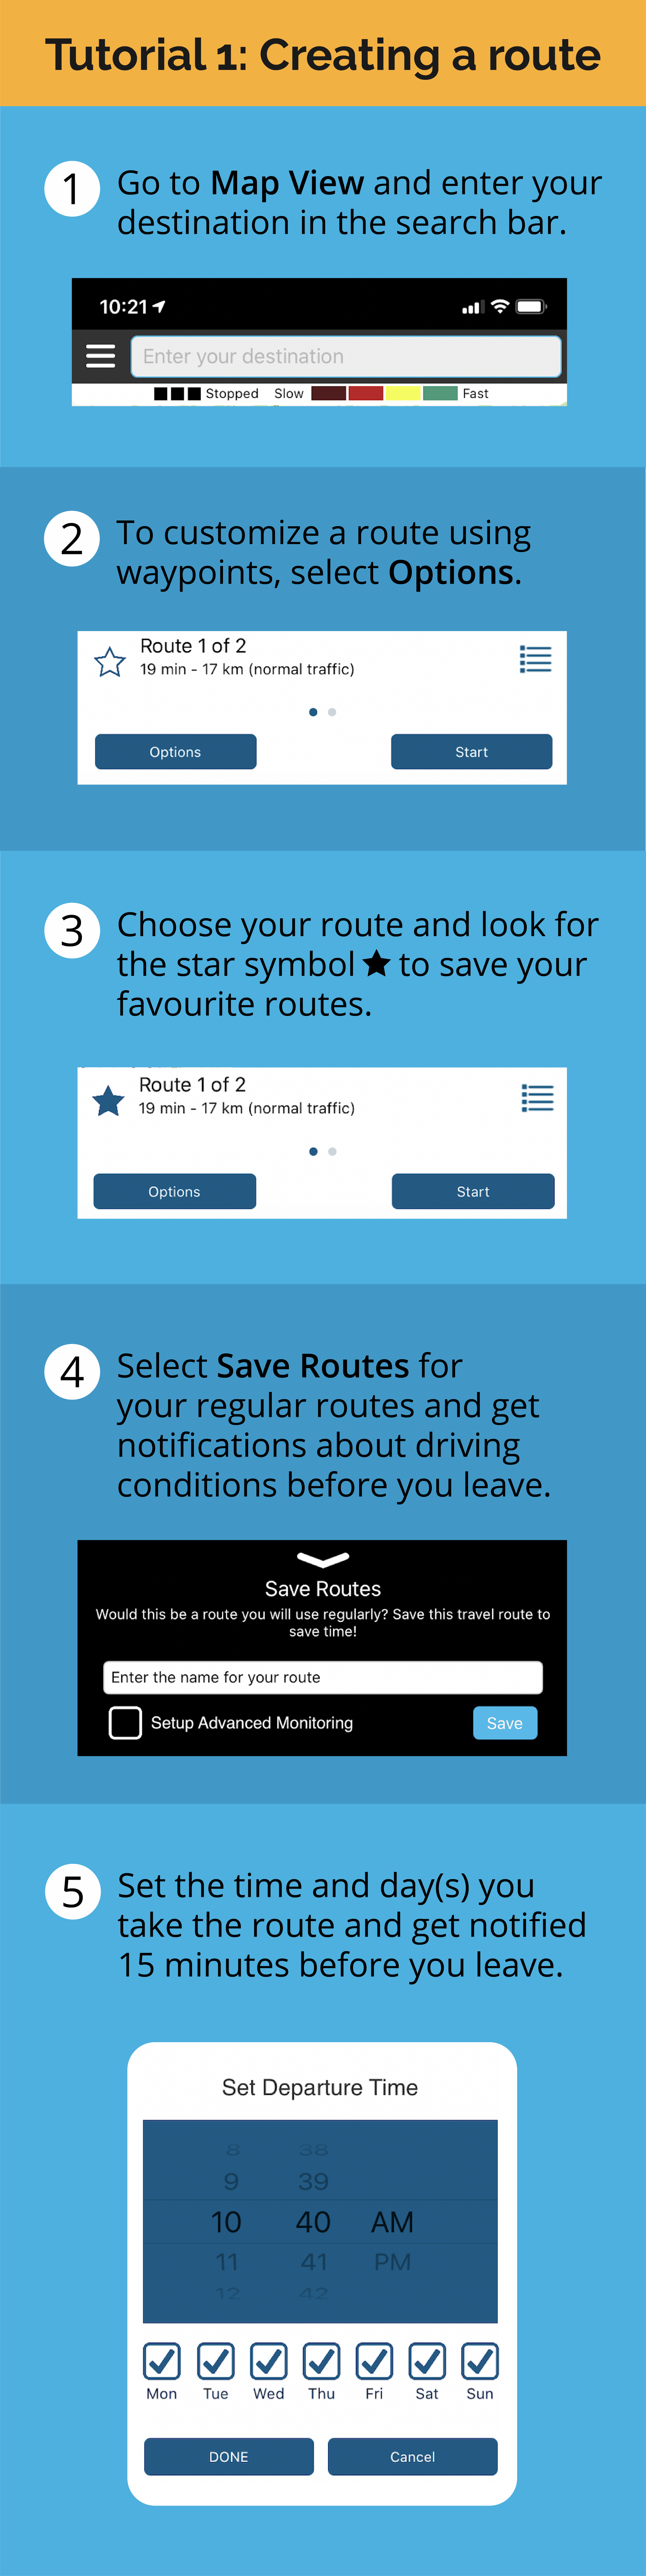 Tutorial 1: Creating a route  1. Go to Map View and enter your destination in the search bar. 2.	To customize a route using waypoints, select Options. 3.	Choose your route and look for the star symbol to save your favourite routes. 4.	Select Save Routes for your regular routes and get notifications about driving conditions before you leave. 5.	Set the time and day(s) you take the route and get notified 15 minutes before you leave.